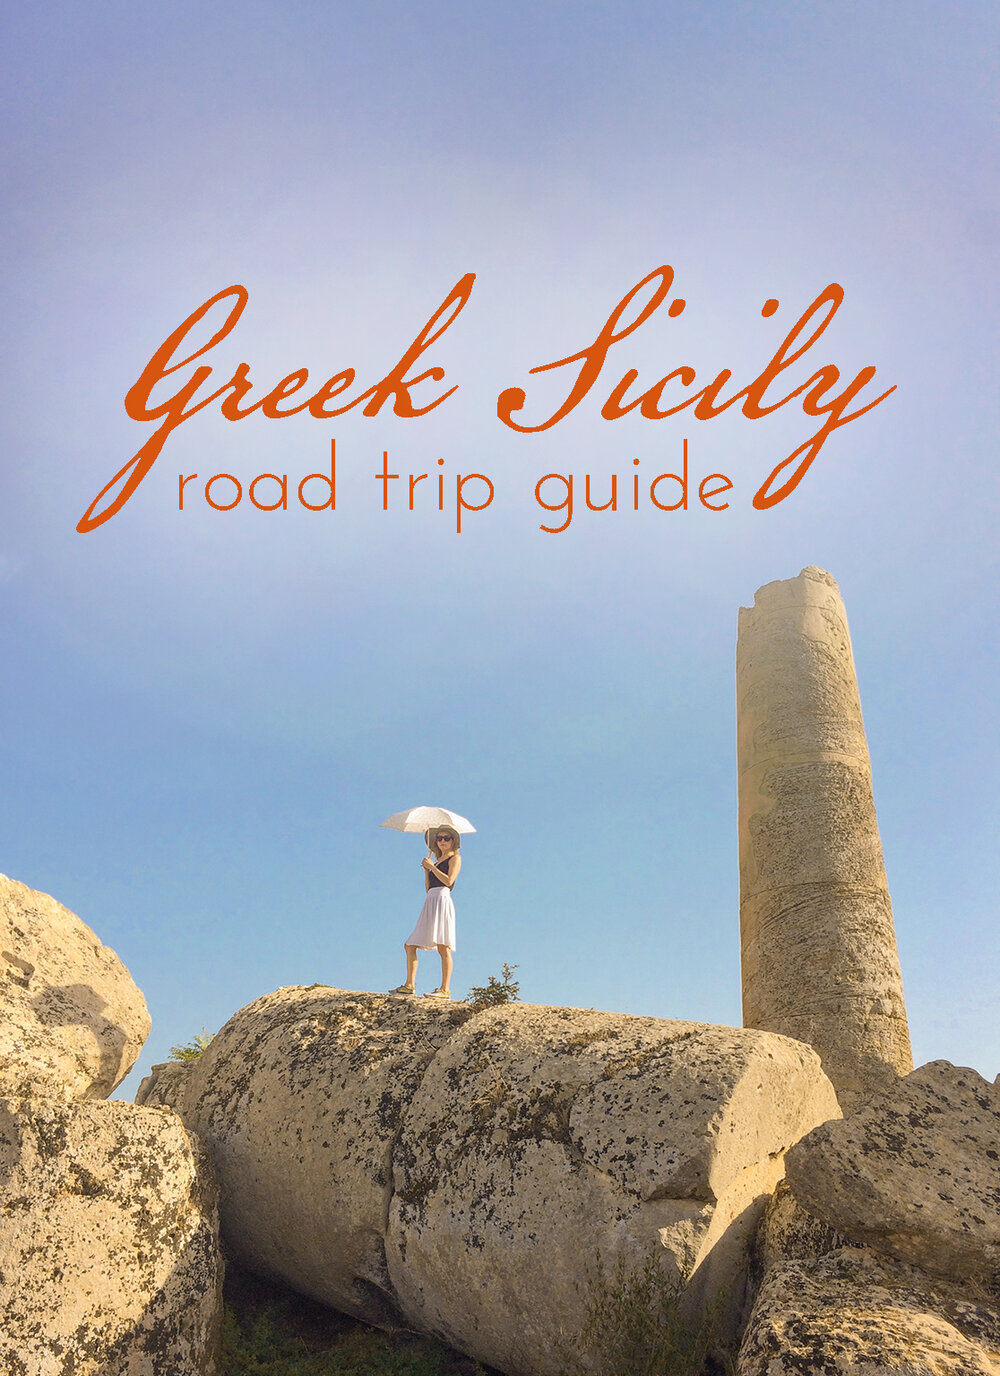 covid-friendly-slow-travel-road-trip-guide-sicily